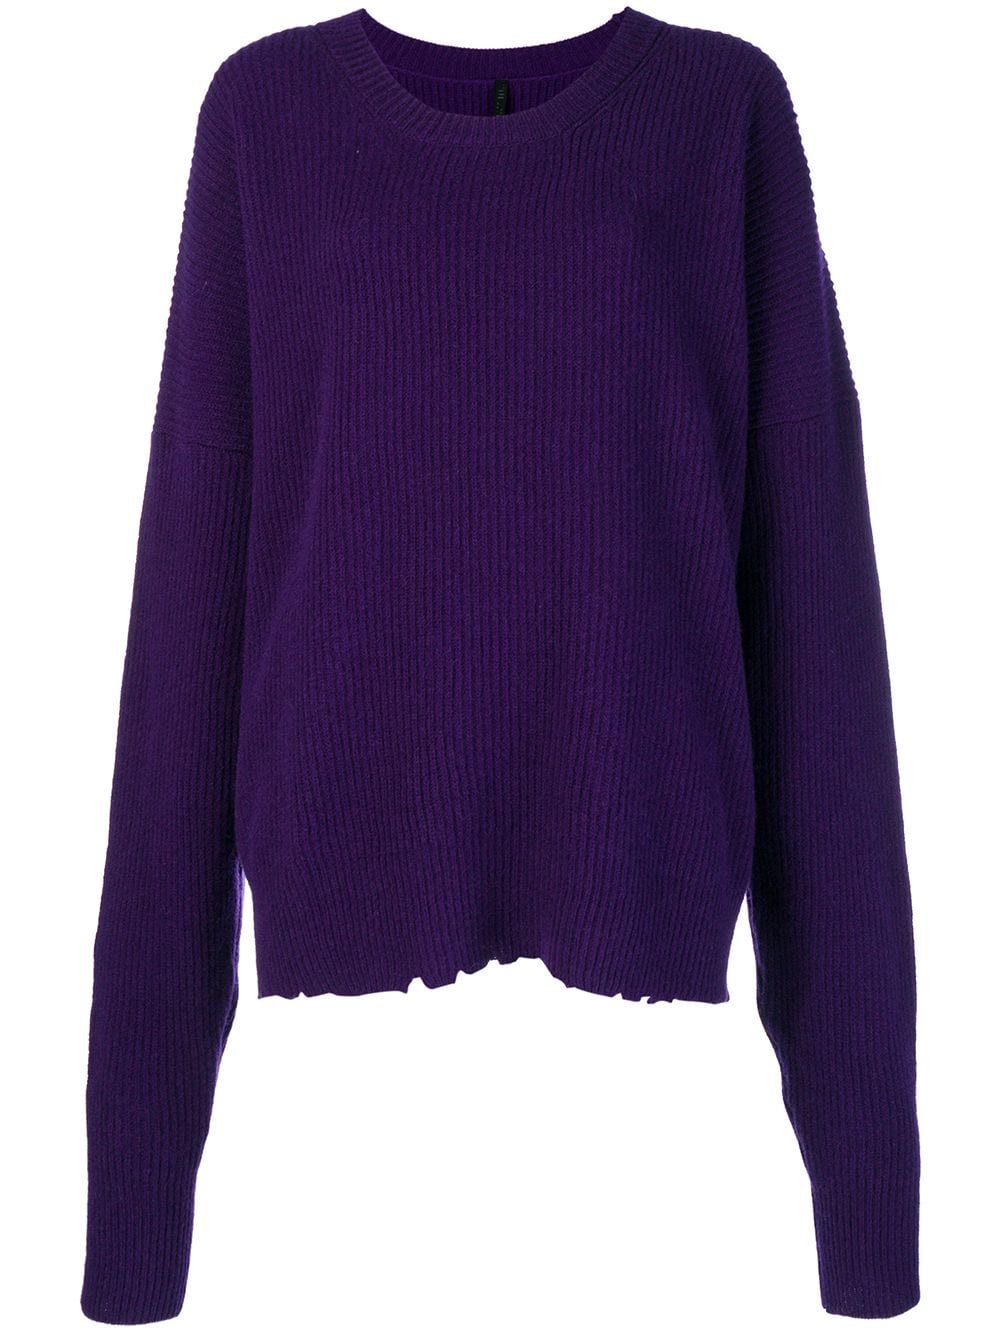 UNRAVEL PROJECT oversized distressed crew-neck sweater - Purple von UNRAVEL PROJECT